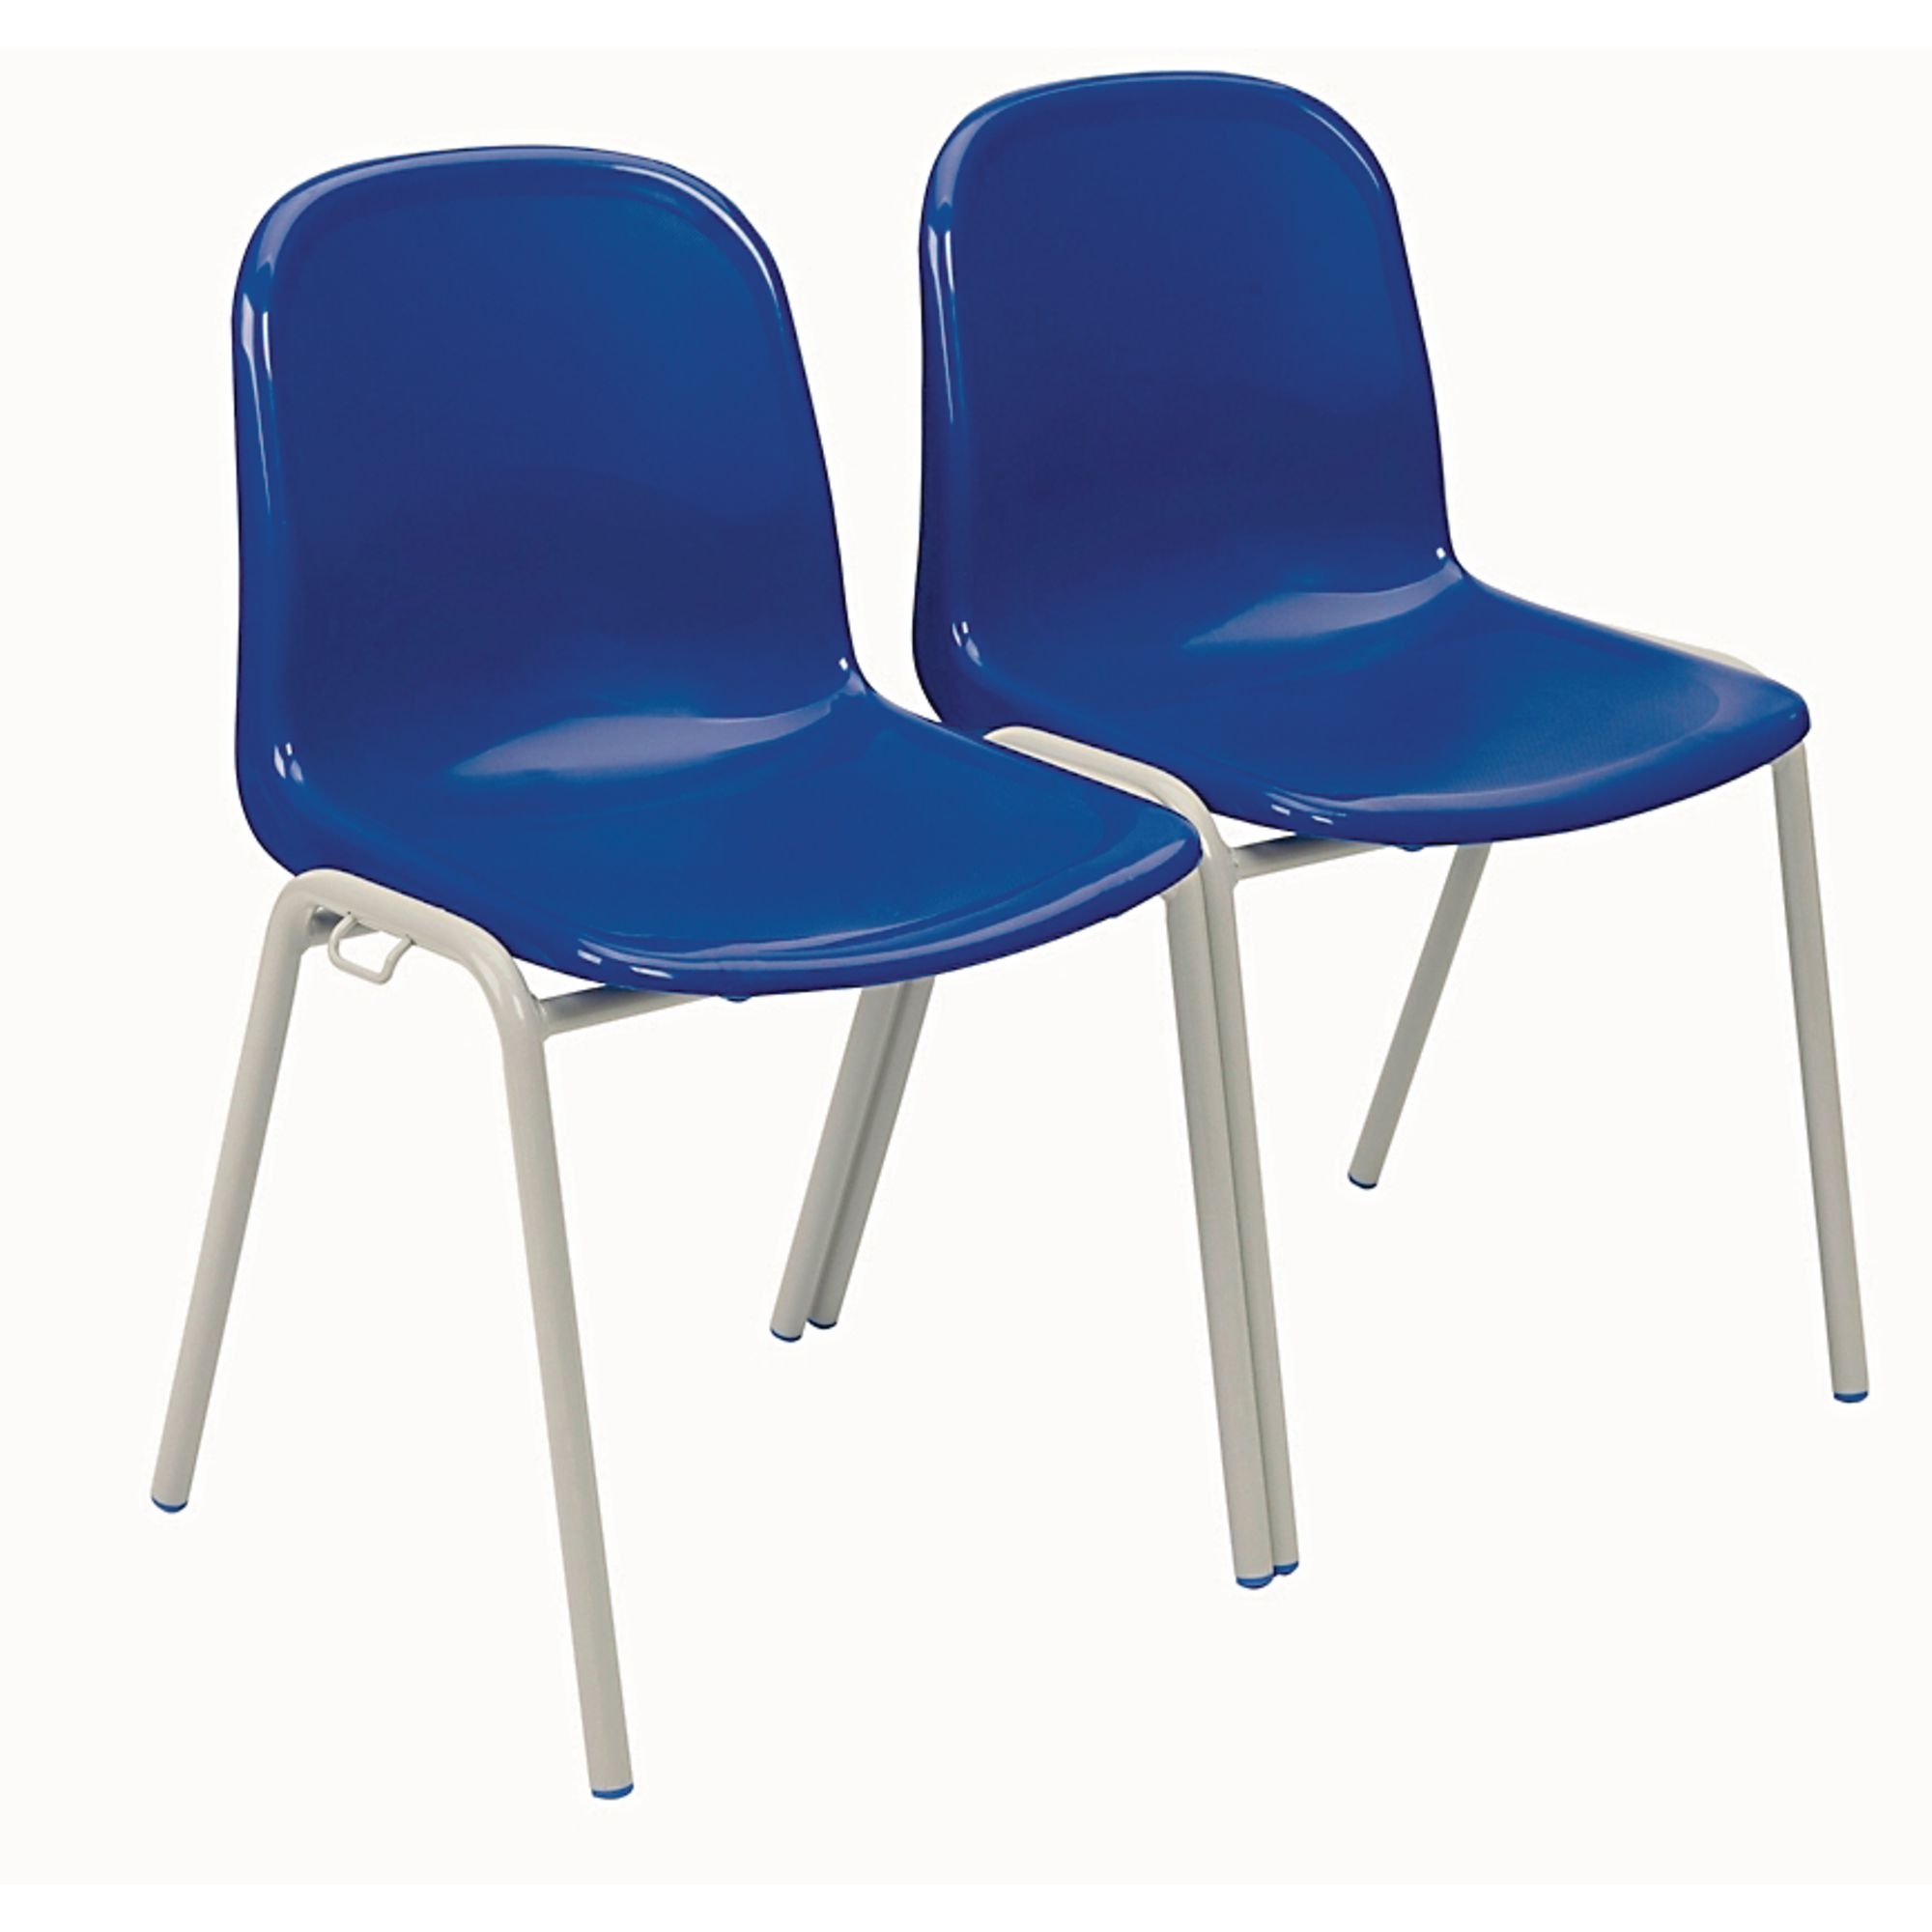 Harmony Linking Chair - Seat height: 460mm - Blue